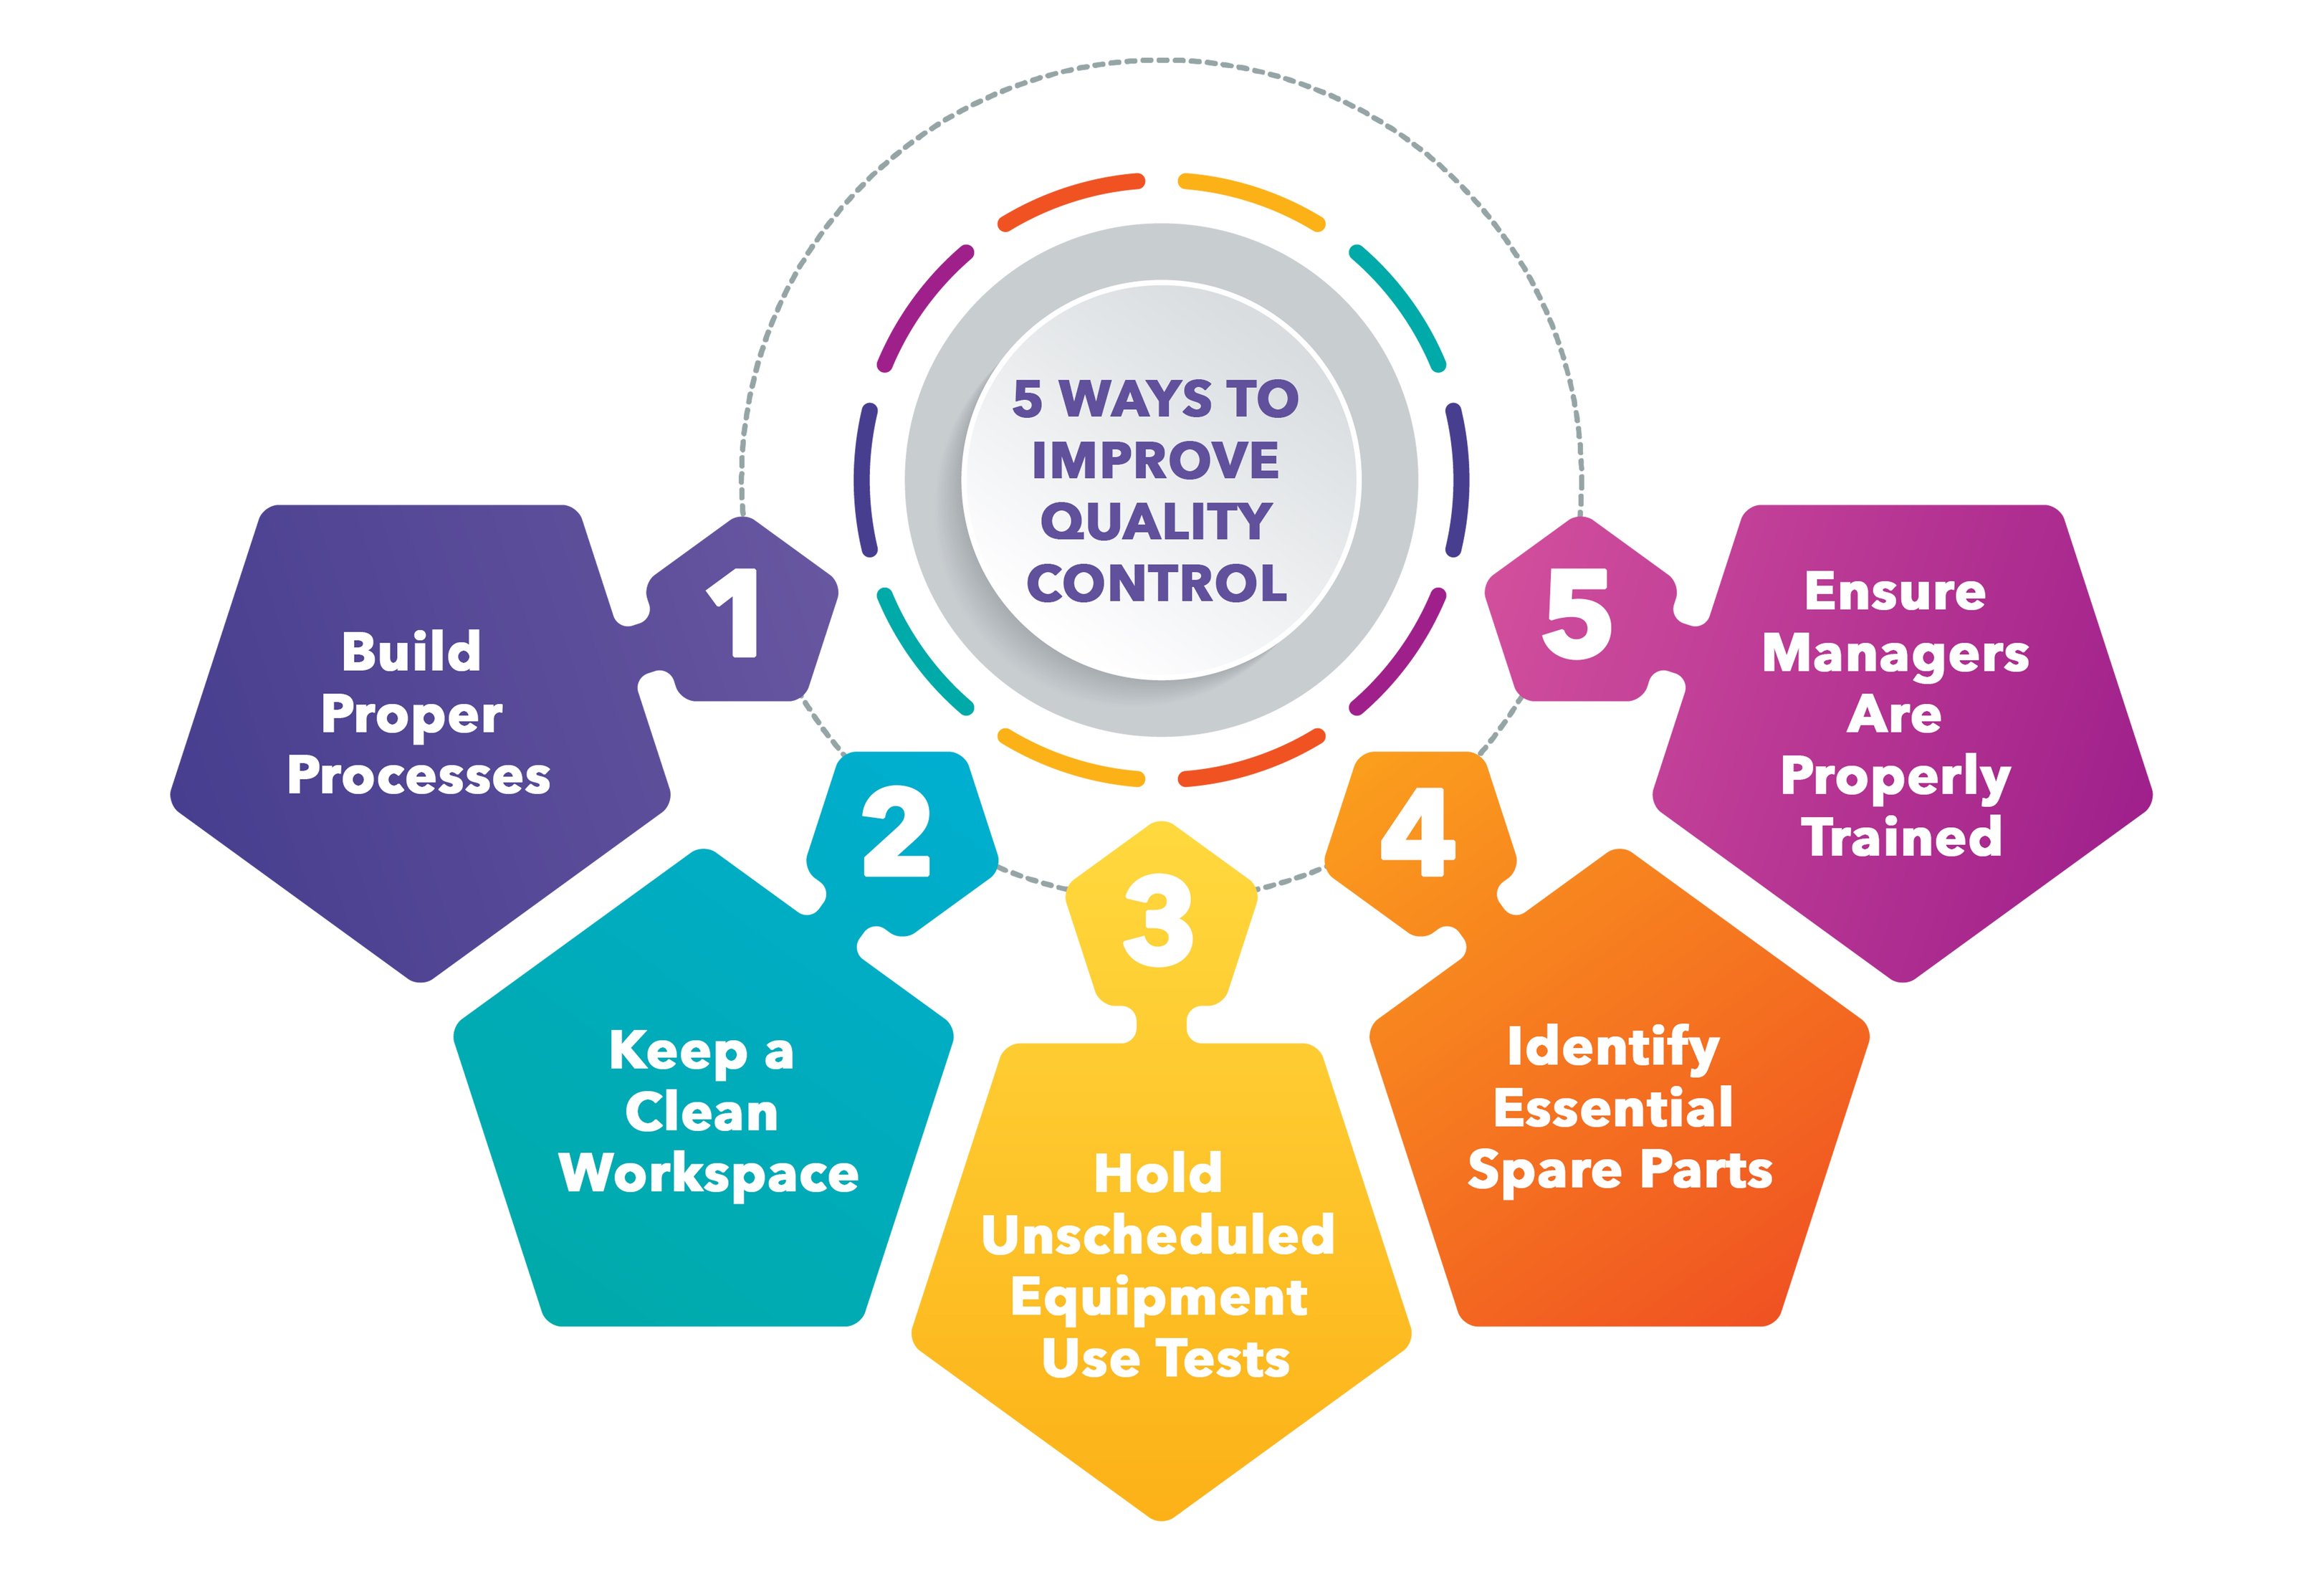  A diagram showing five ways to improve quality control in construction projects, including building proper processes, keeping a clean workspace, conducting unscheduled equipment use tests, identifying essential spare parts, and ensuring managers are properly trained.